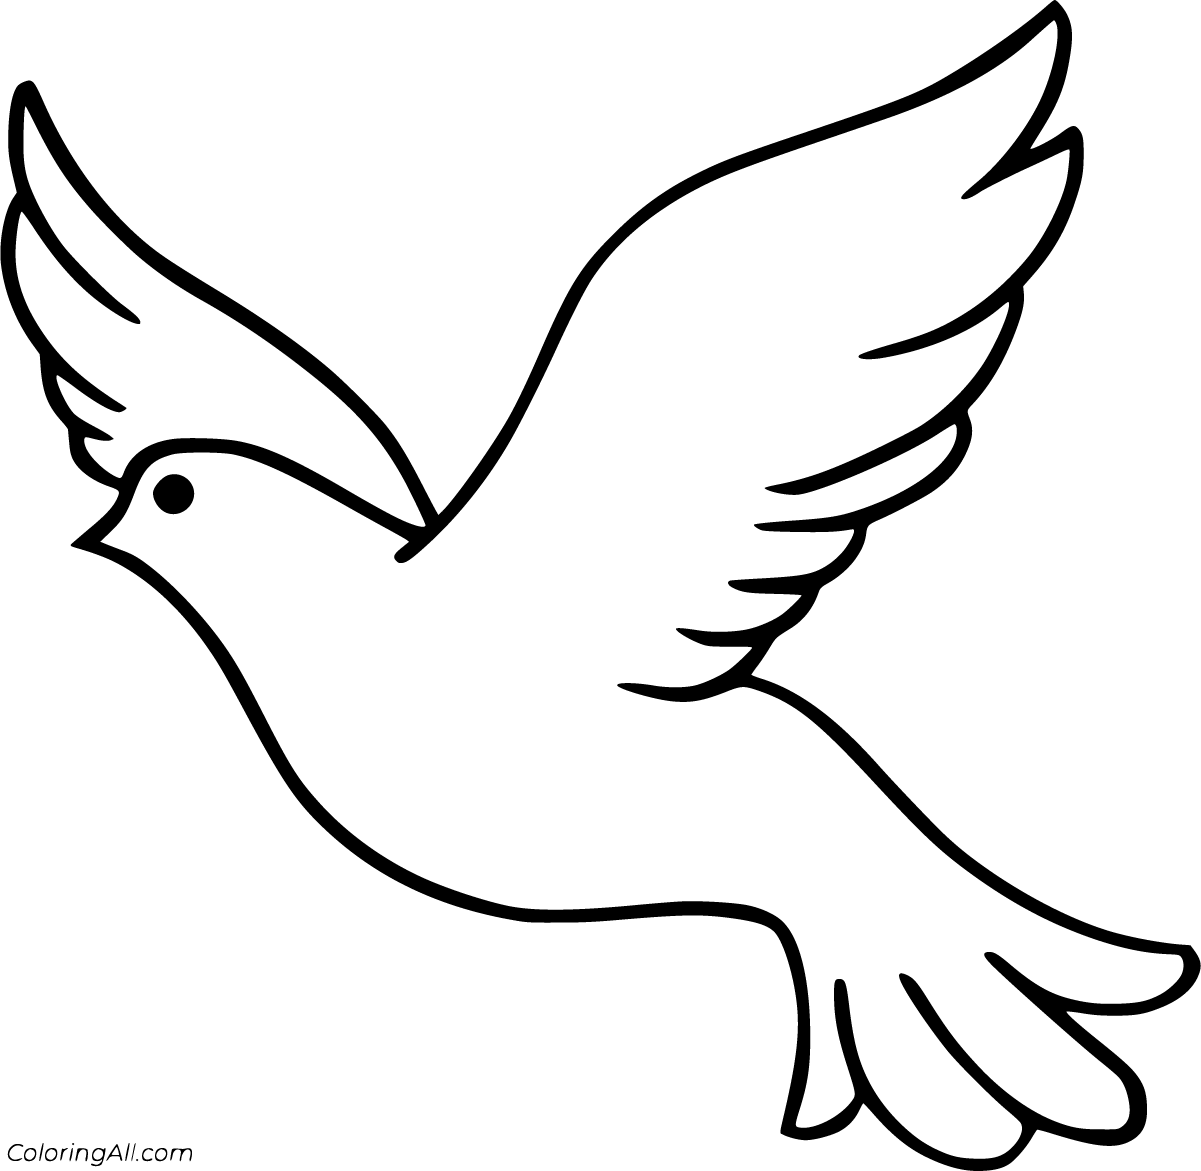 Dove Coloring Pages - ColoringAll